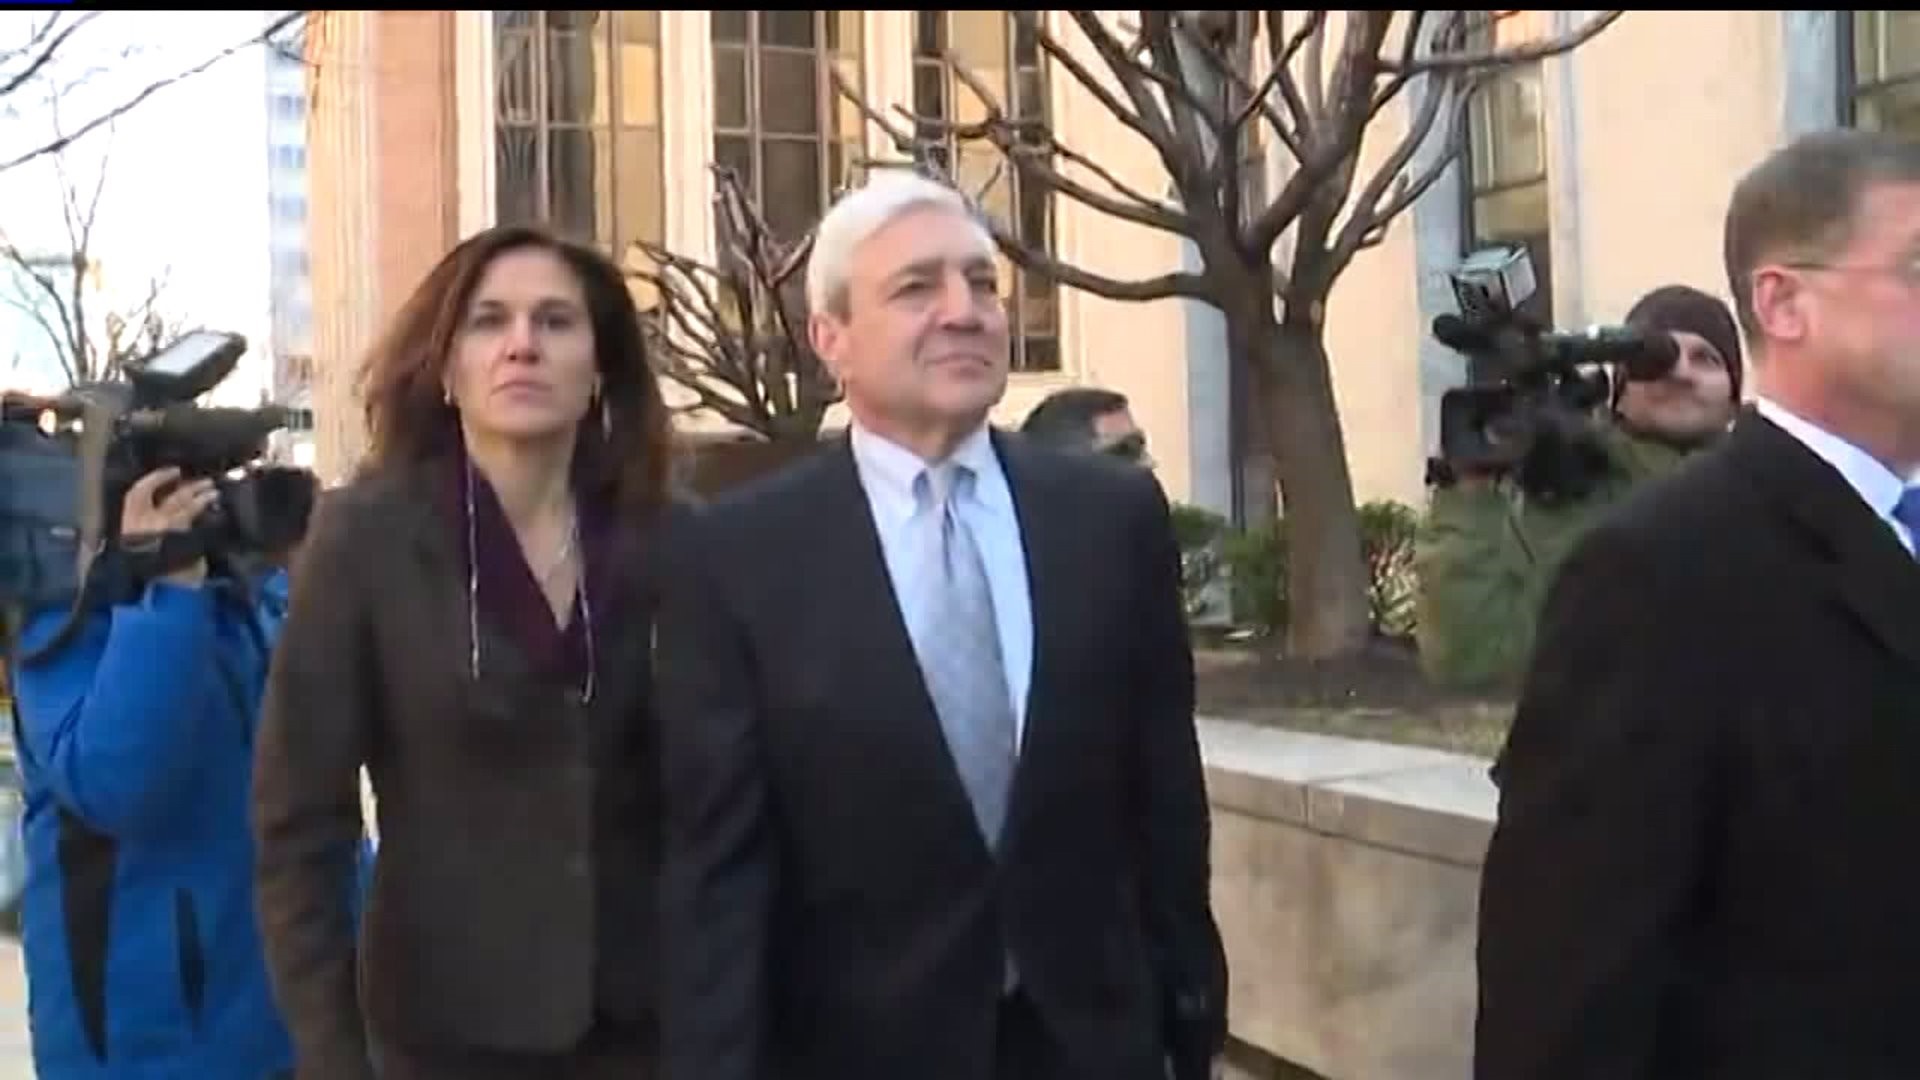 Former PSU administrators Curley, Schultz expected to testify against Spanier